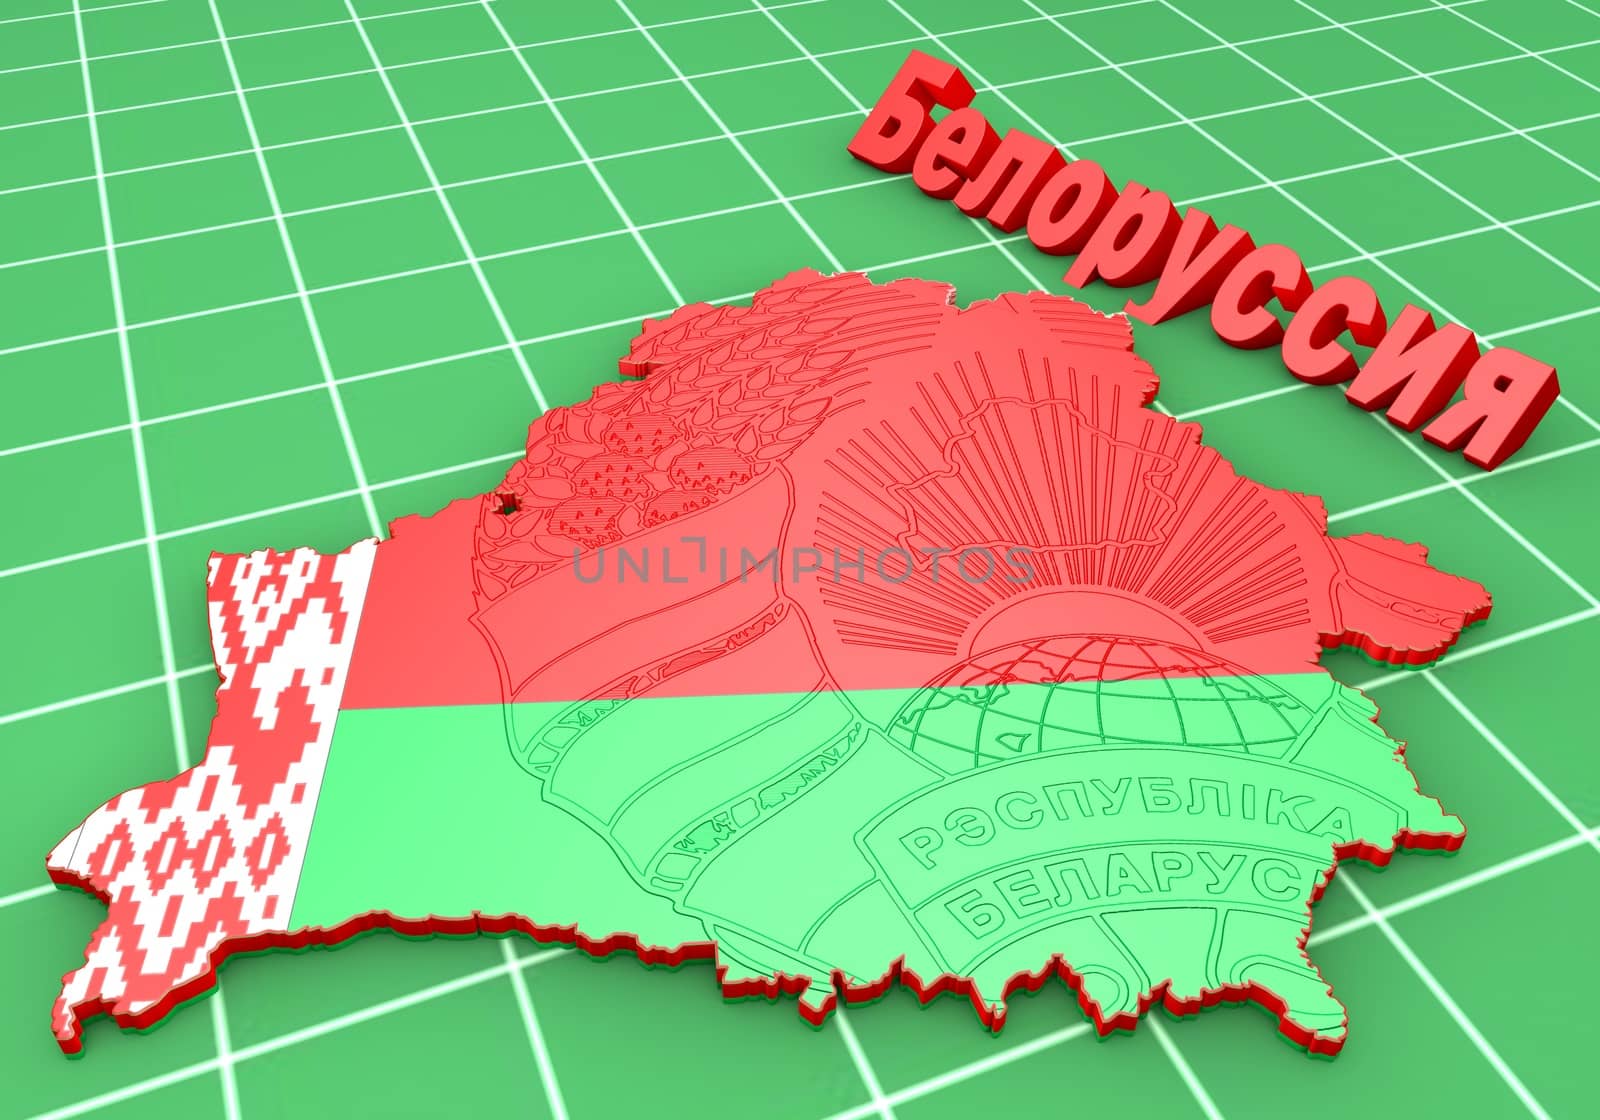 3D Map illustration of Belarus with coat of arms